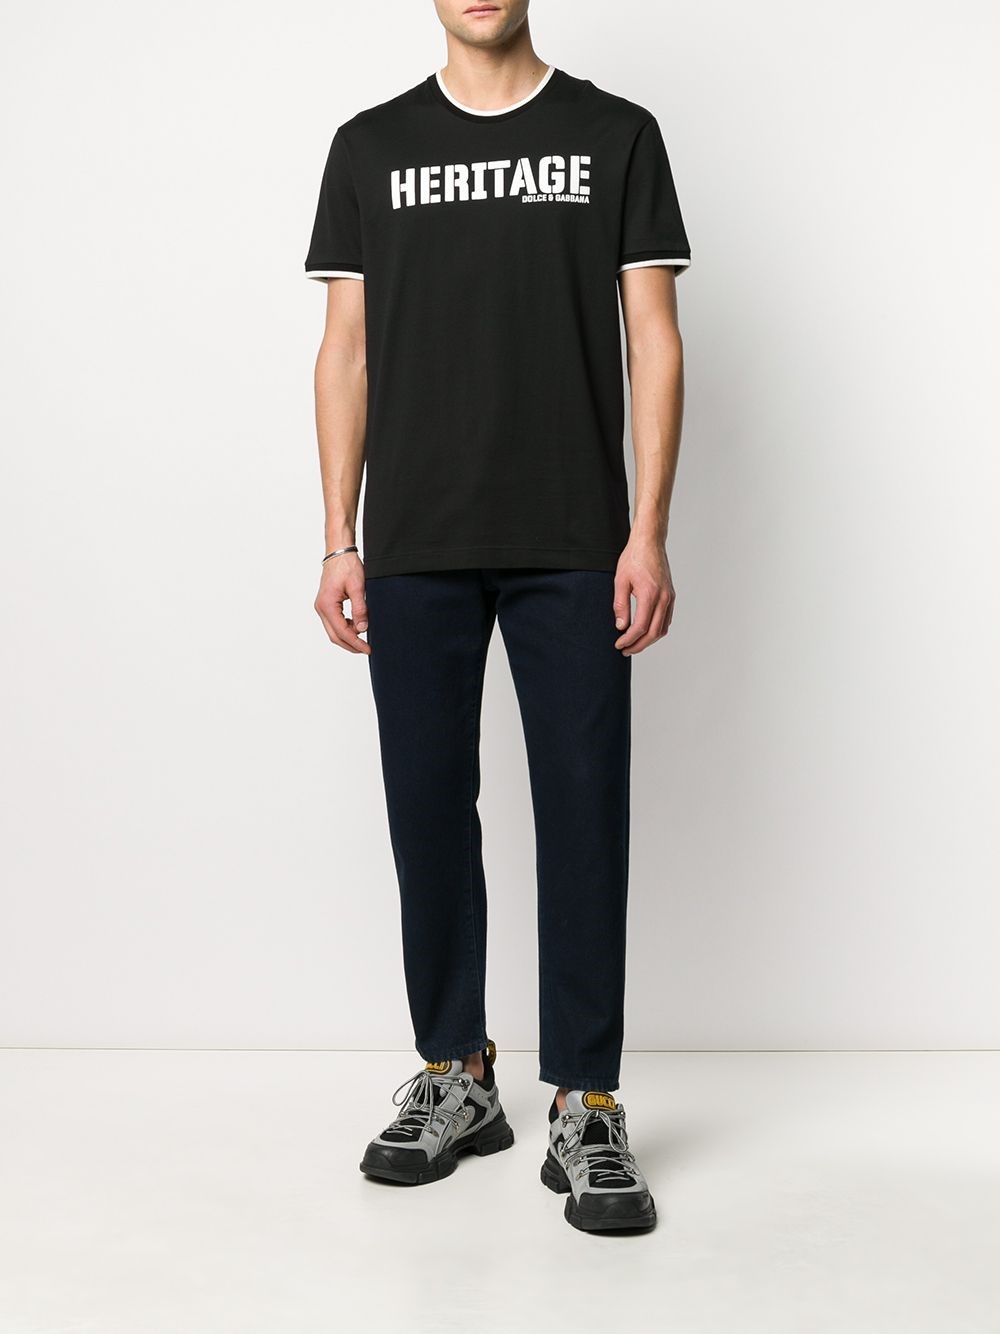 dolce & gabbana HERITAGE T-SHIRT available on montiboutique.com - 33967